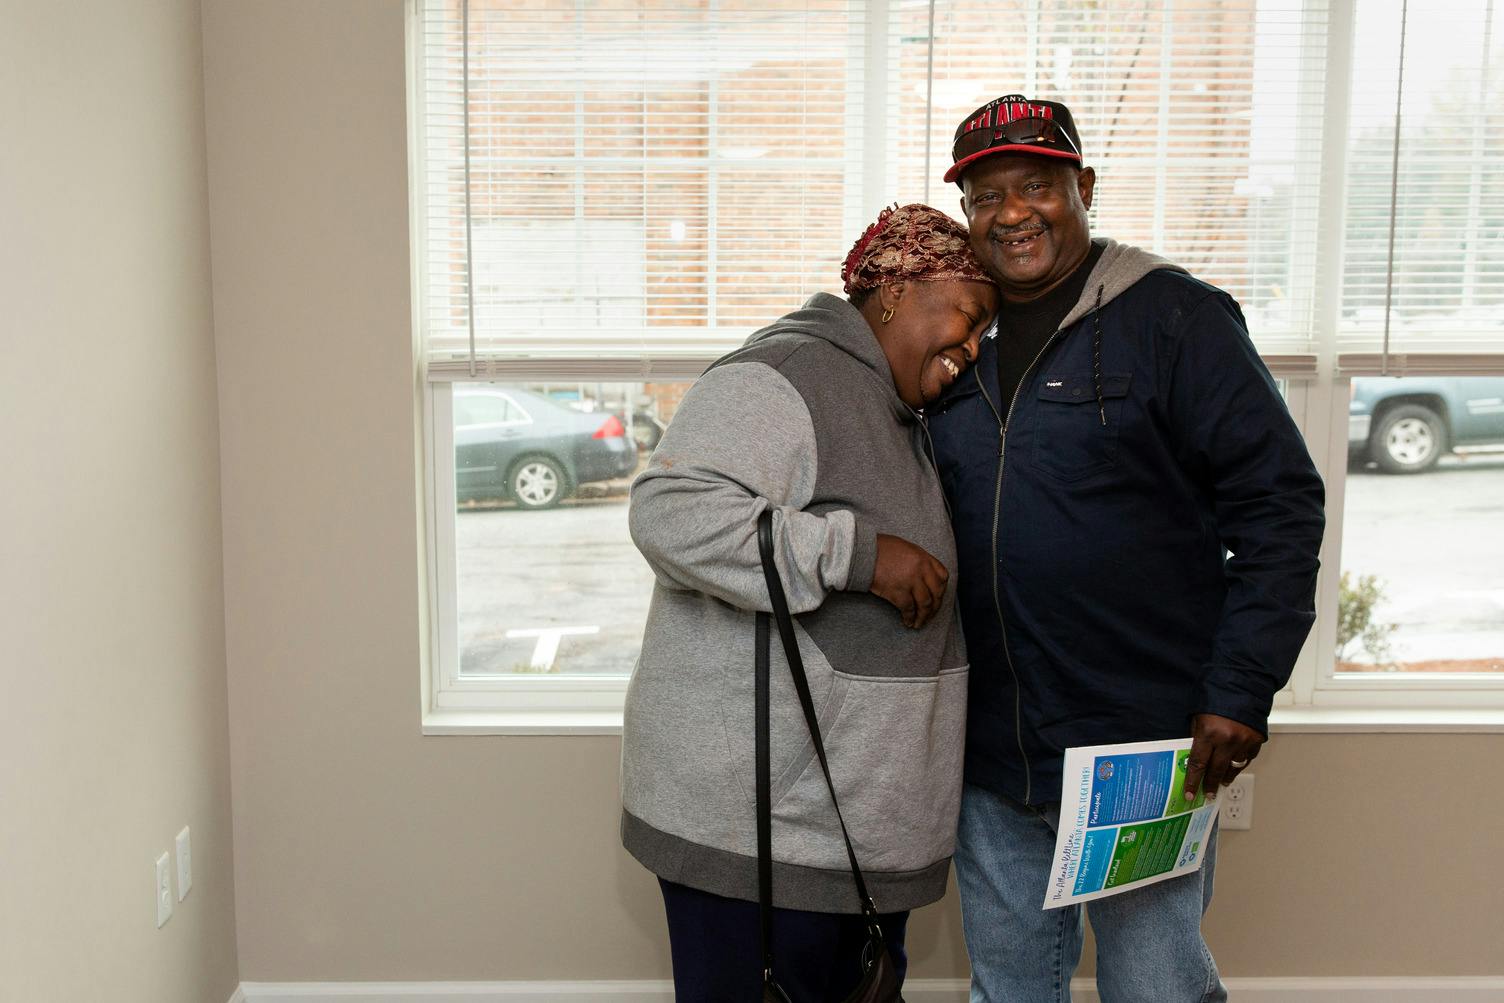 A happy older couple stands in an empty apartment smiling and hugging.